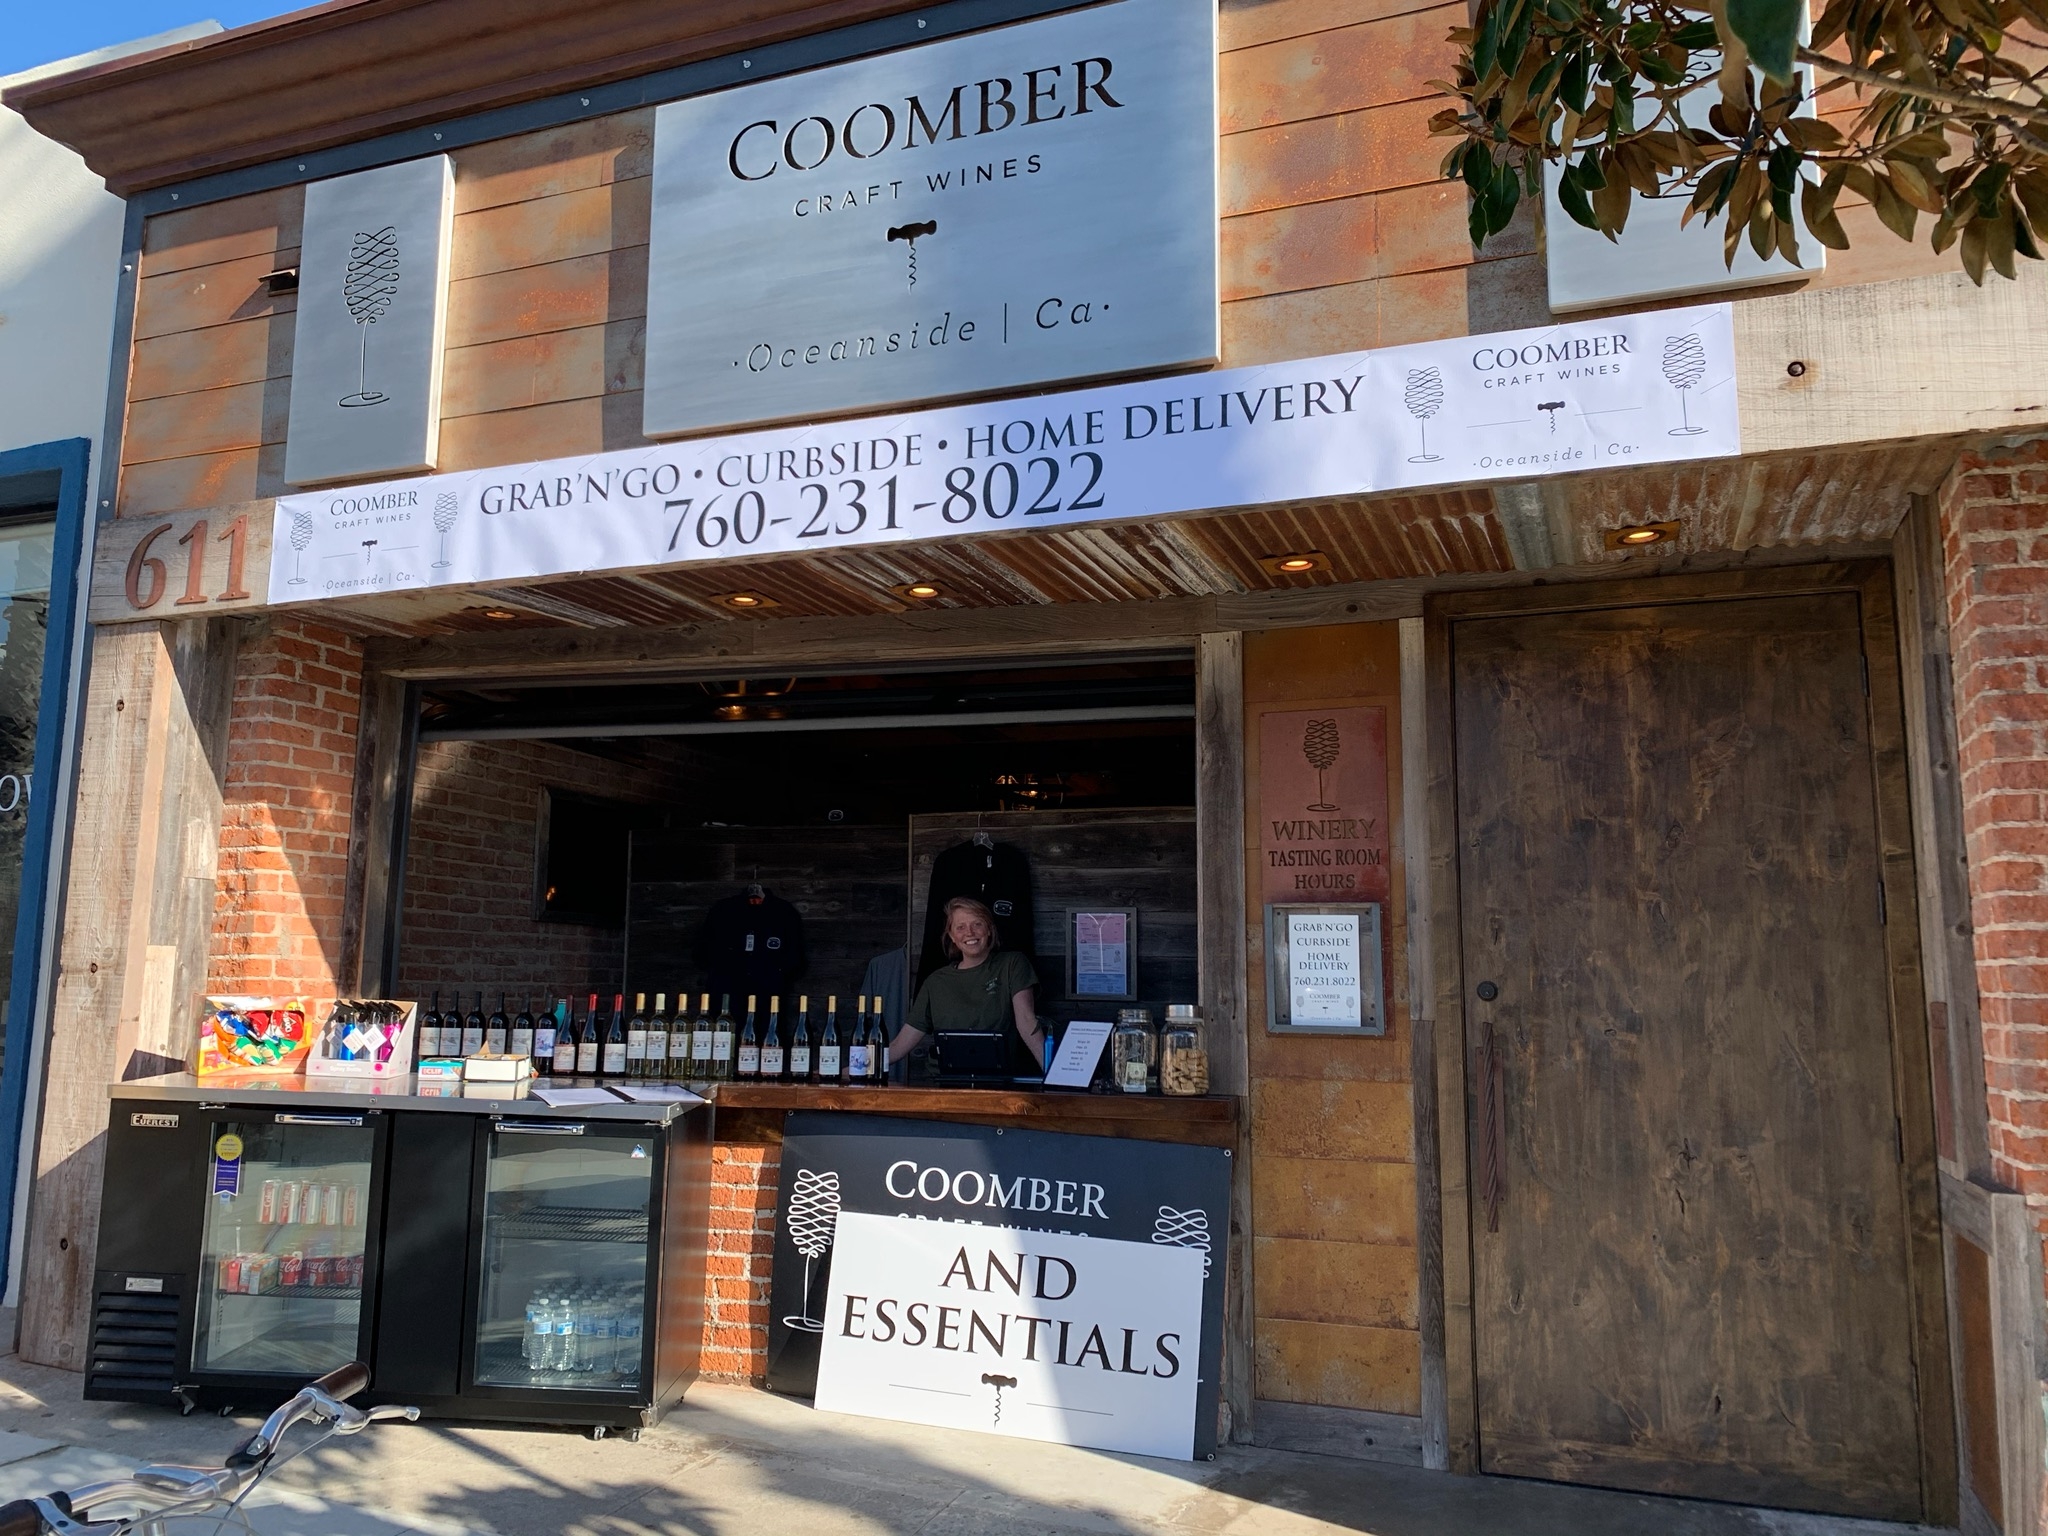 Coomber Craft Wines Storefront